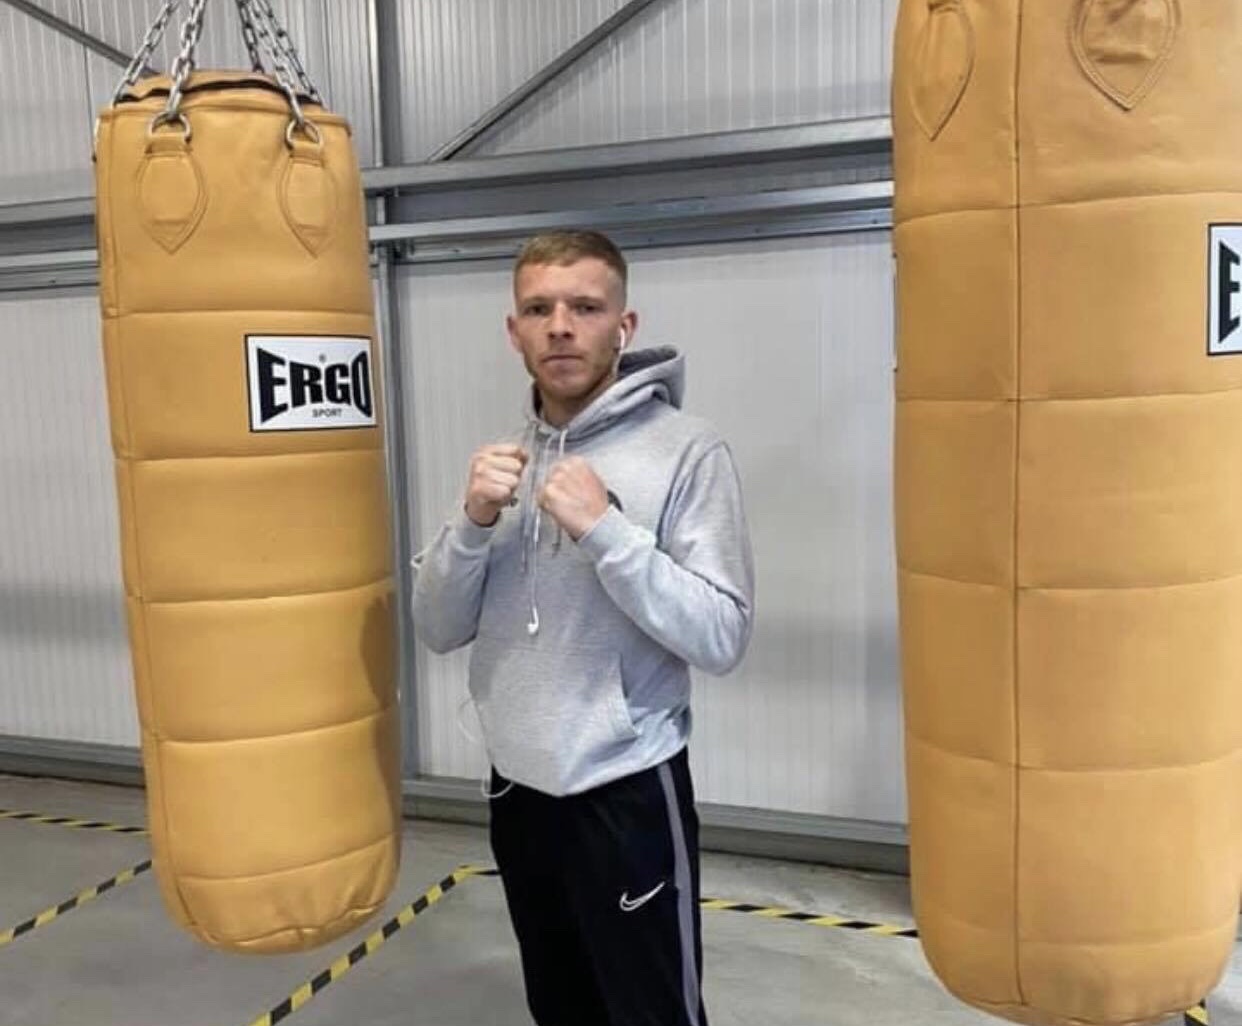 BOXING | Edmunds looks forward to flying the flag for Herefordshire in his first professional fight this weekend